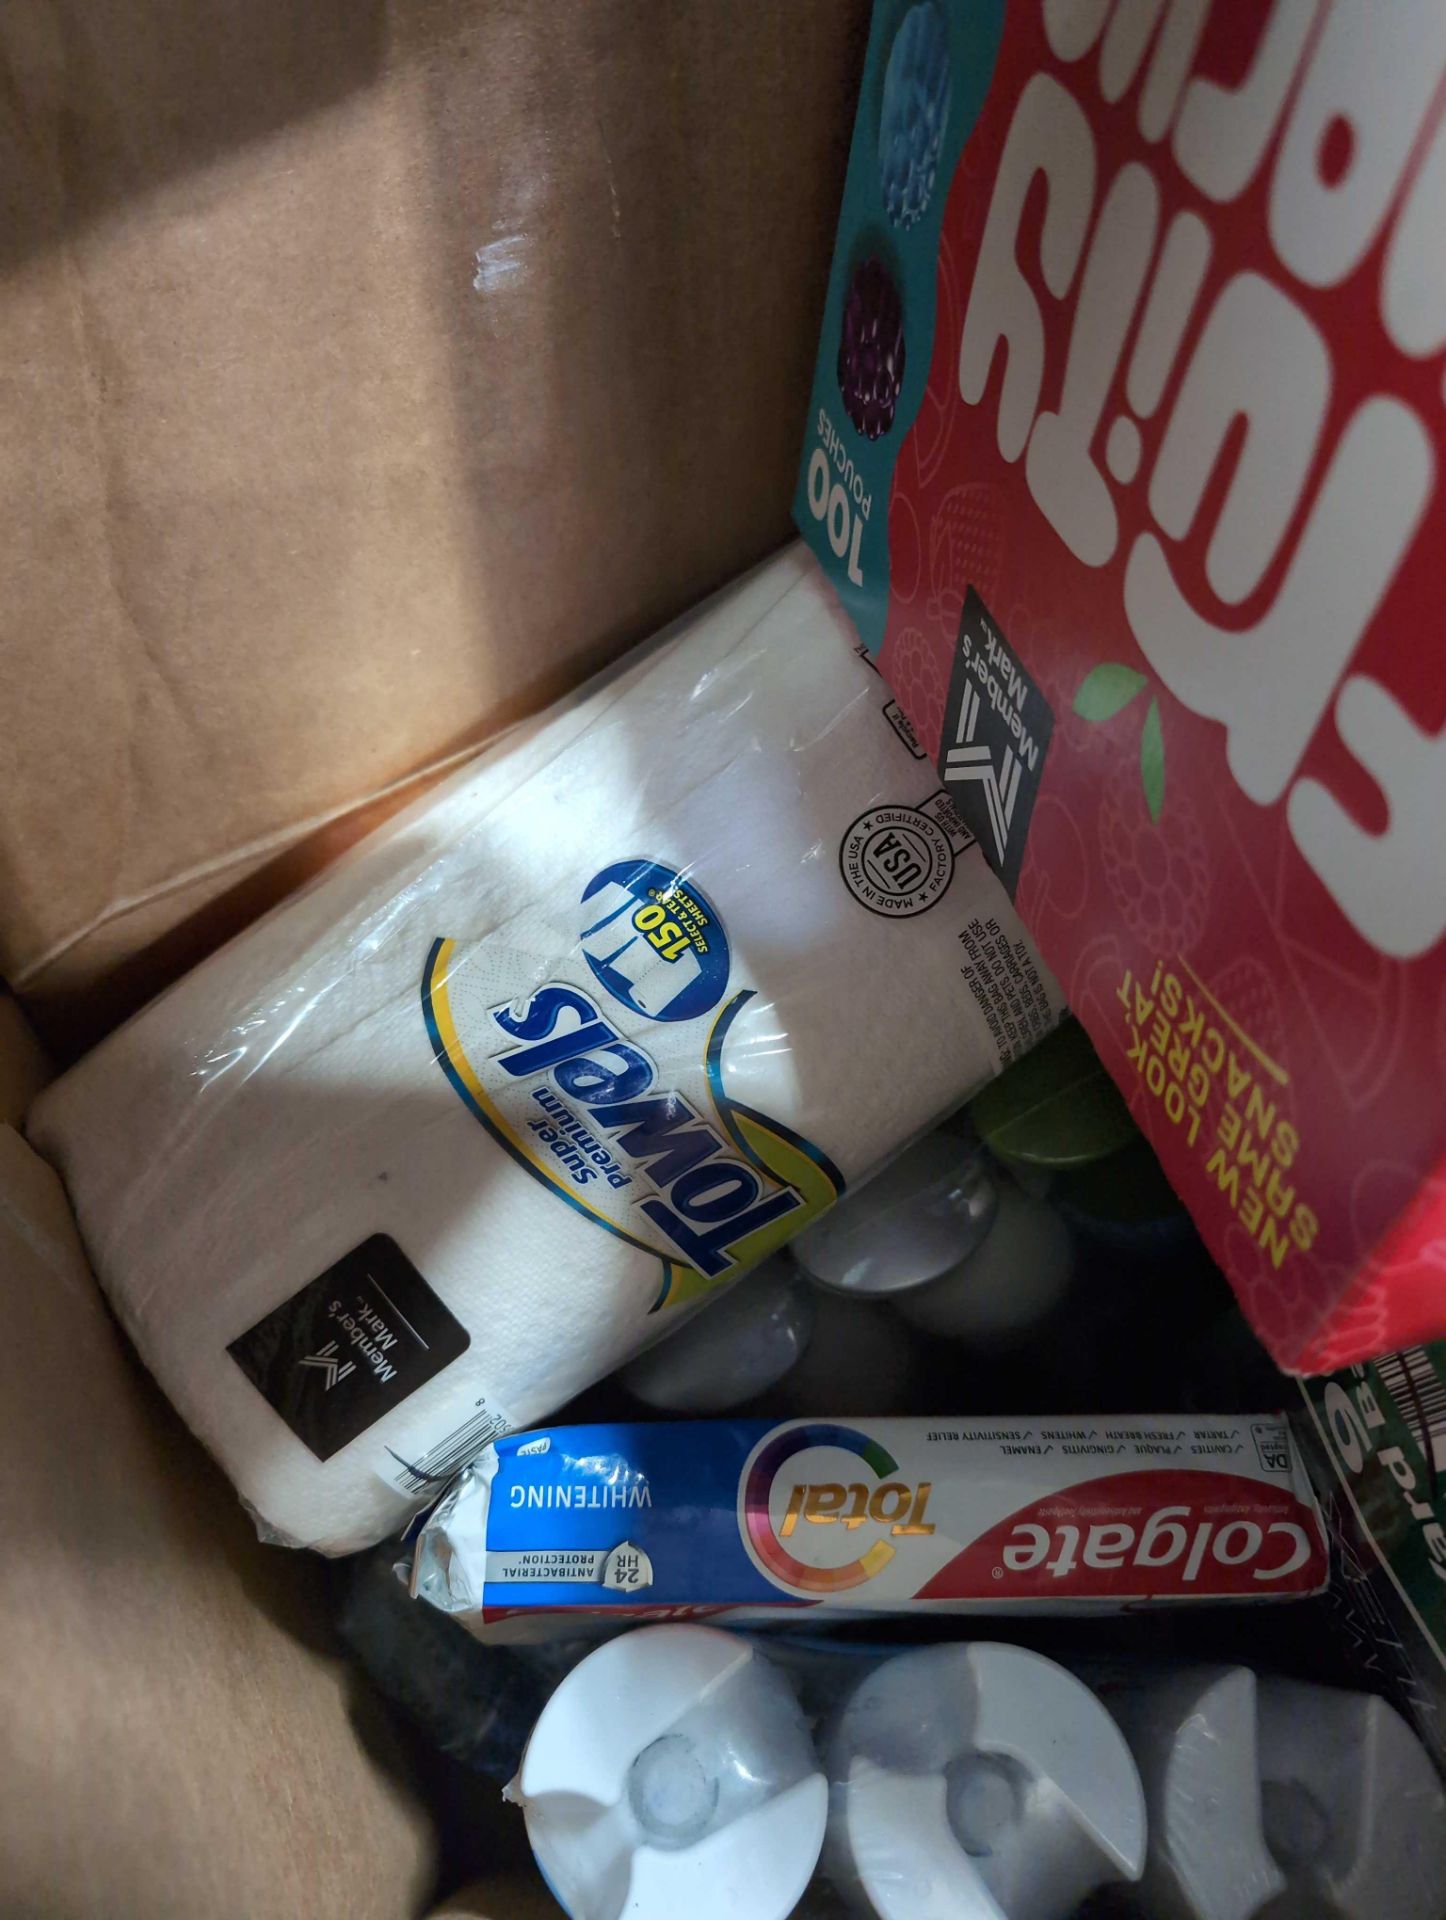 Big box store in a box: Toilet Paper, food containers, Towels, laundry detergent, nacho cheese sauce - Image 6 of 12